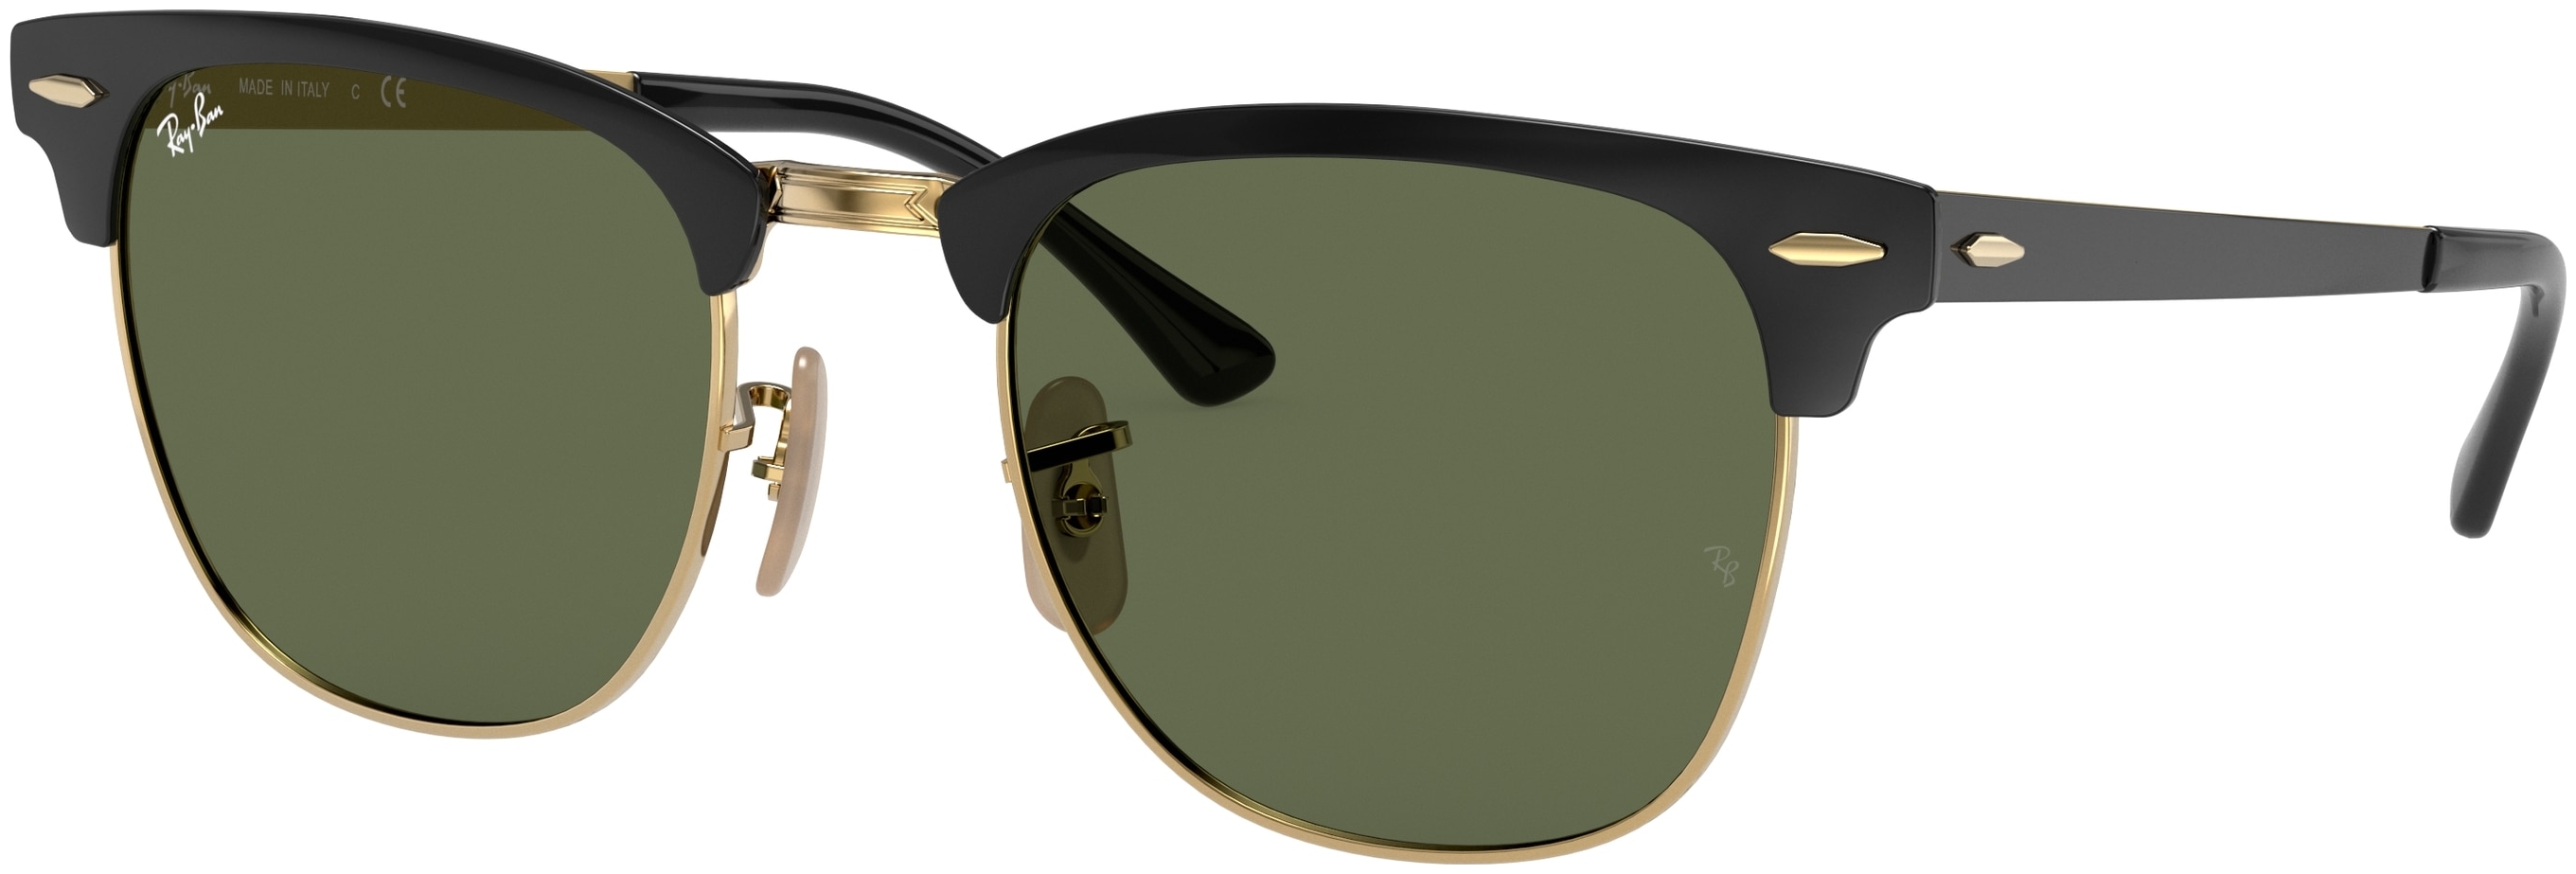 Ray-Ban RB3716 187 CLUBMASTER METAL